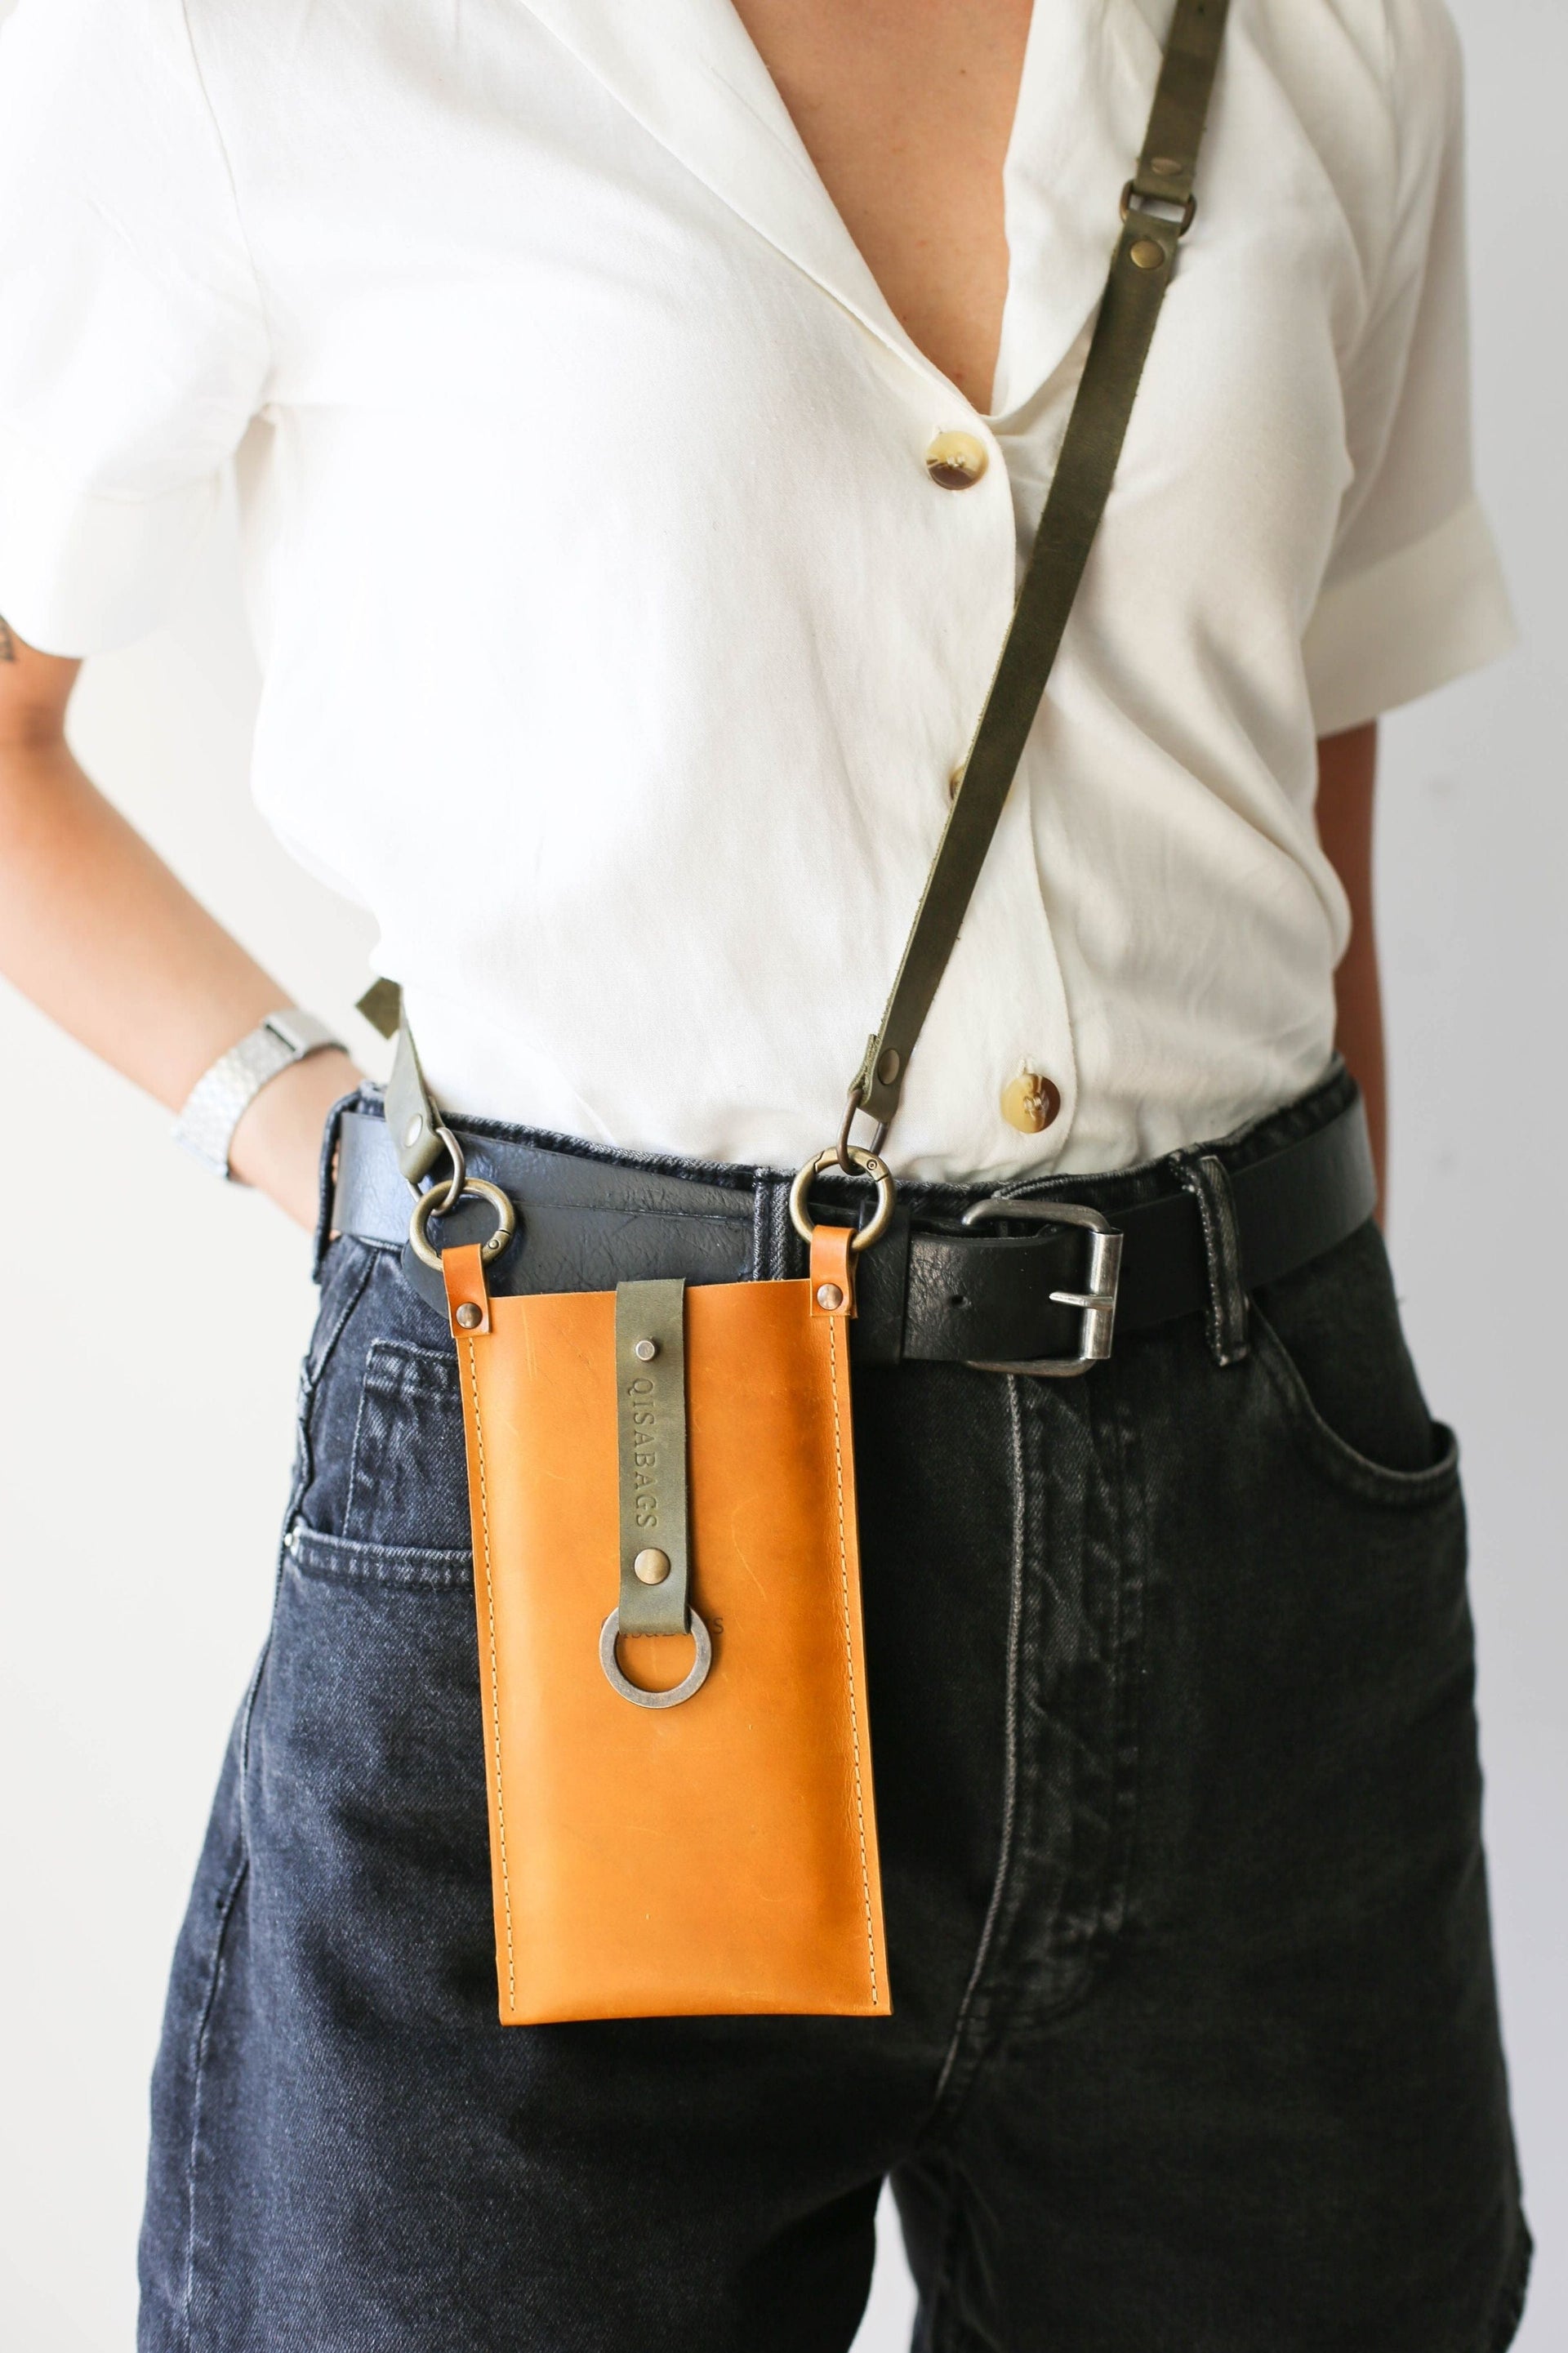 Small Cross body leather bag